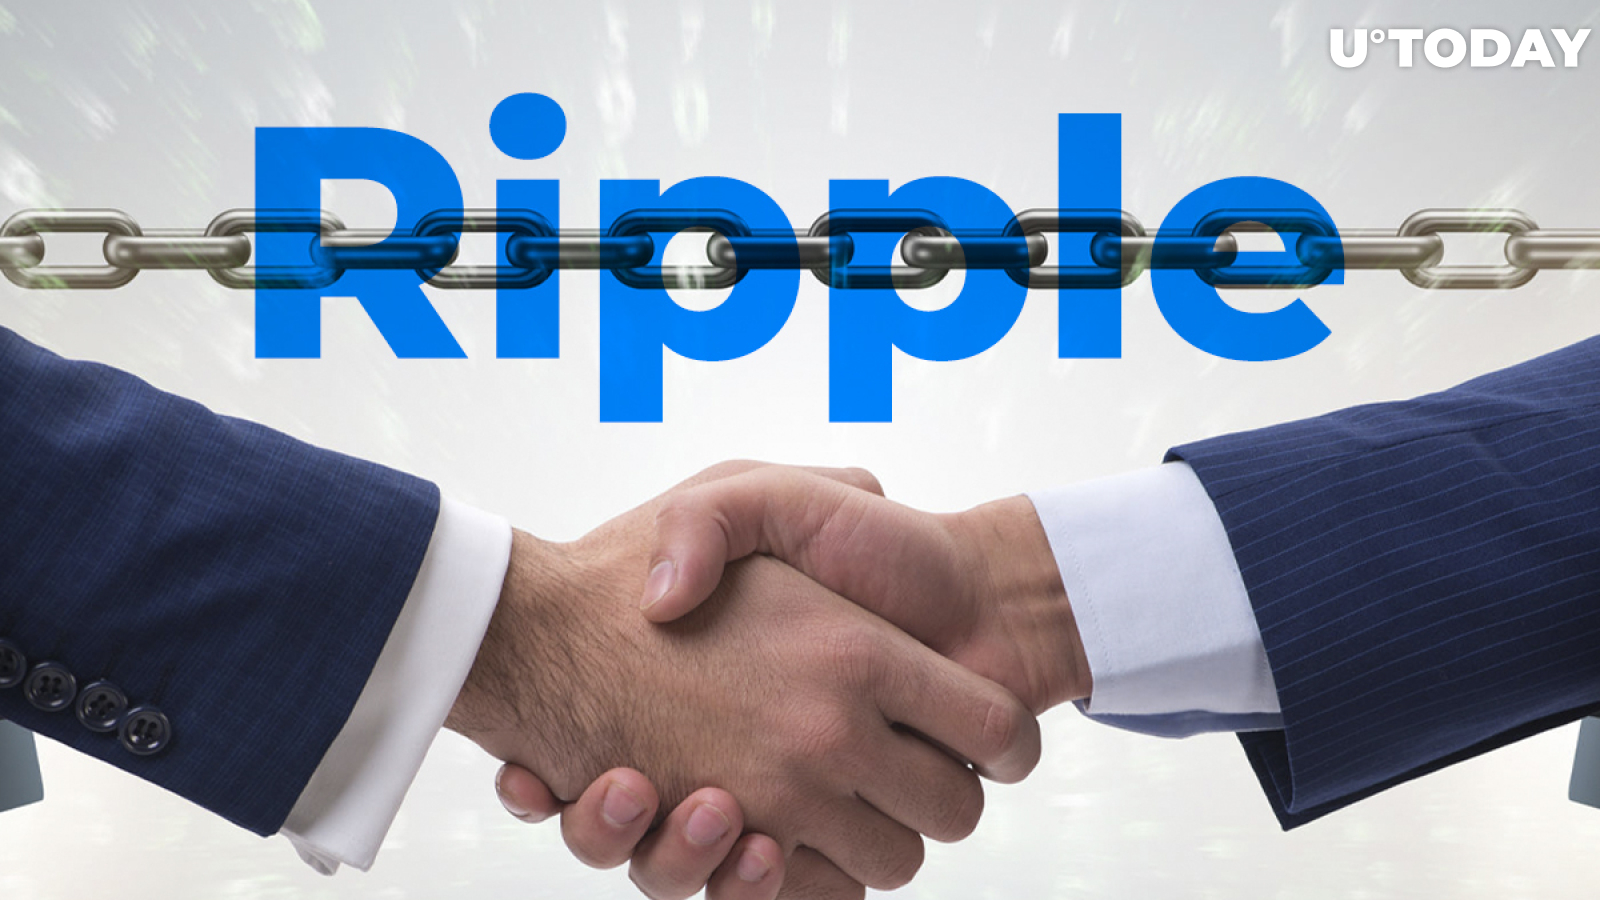 Ripple’s Top Executive Gets on Blockchain Association Board as Co-Chair